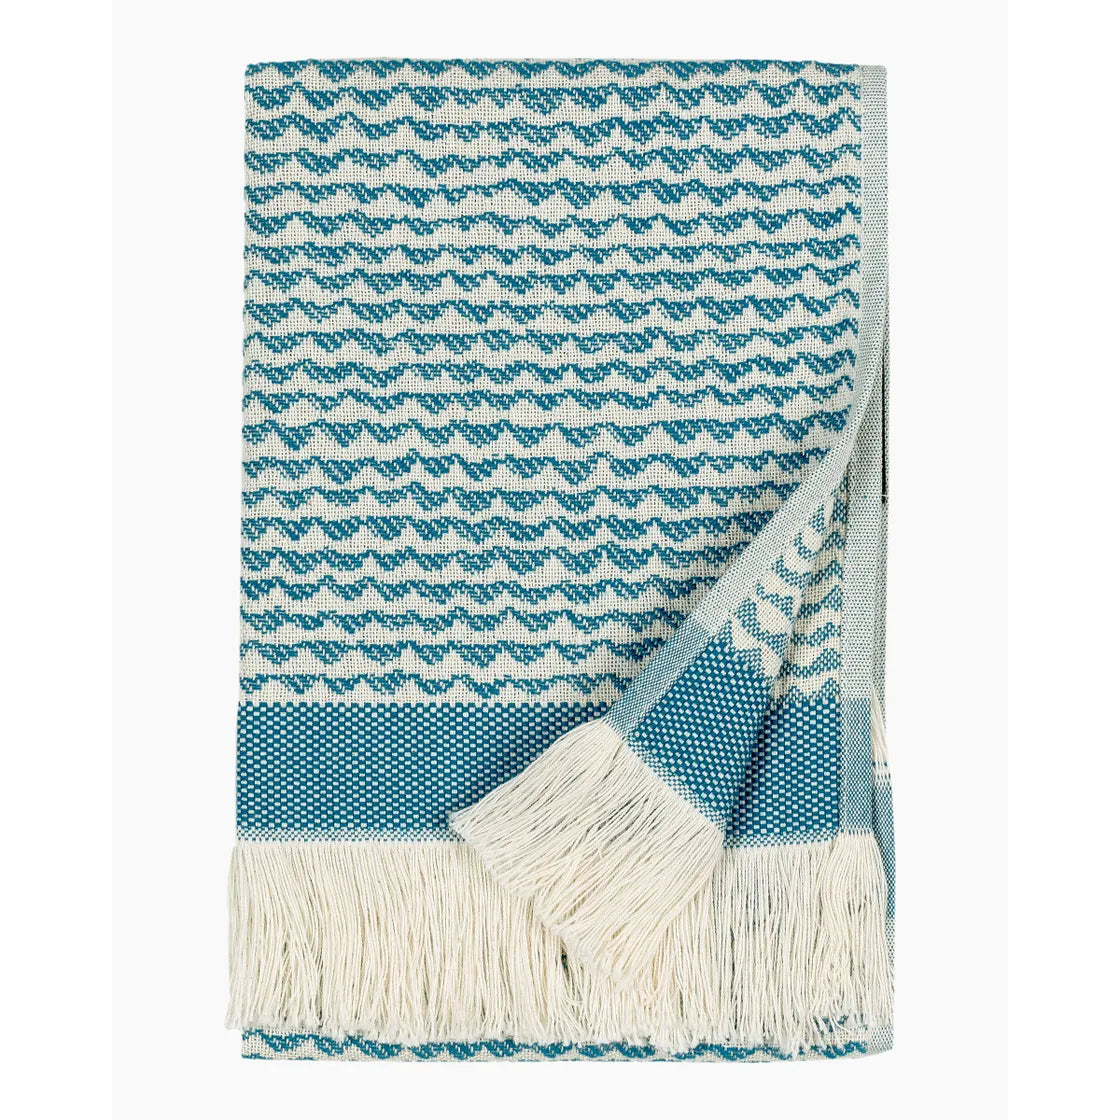 Papajo guest towel 30x50cm off white / turquoise 071546 170